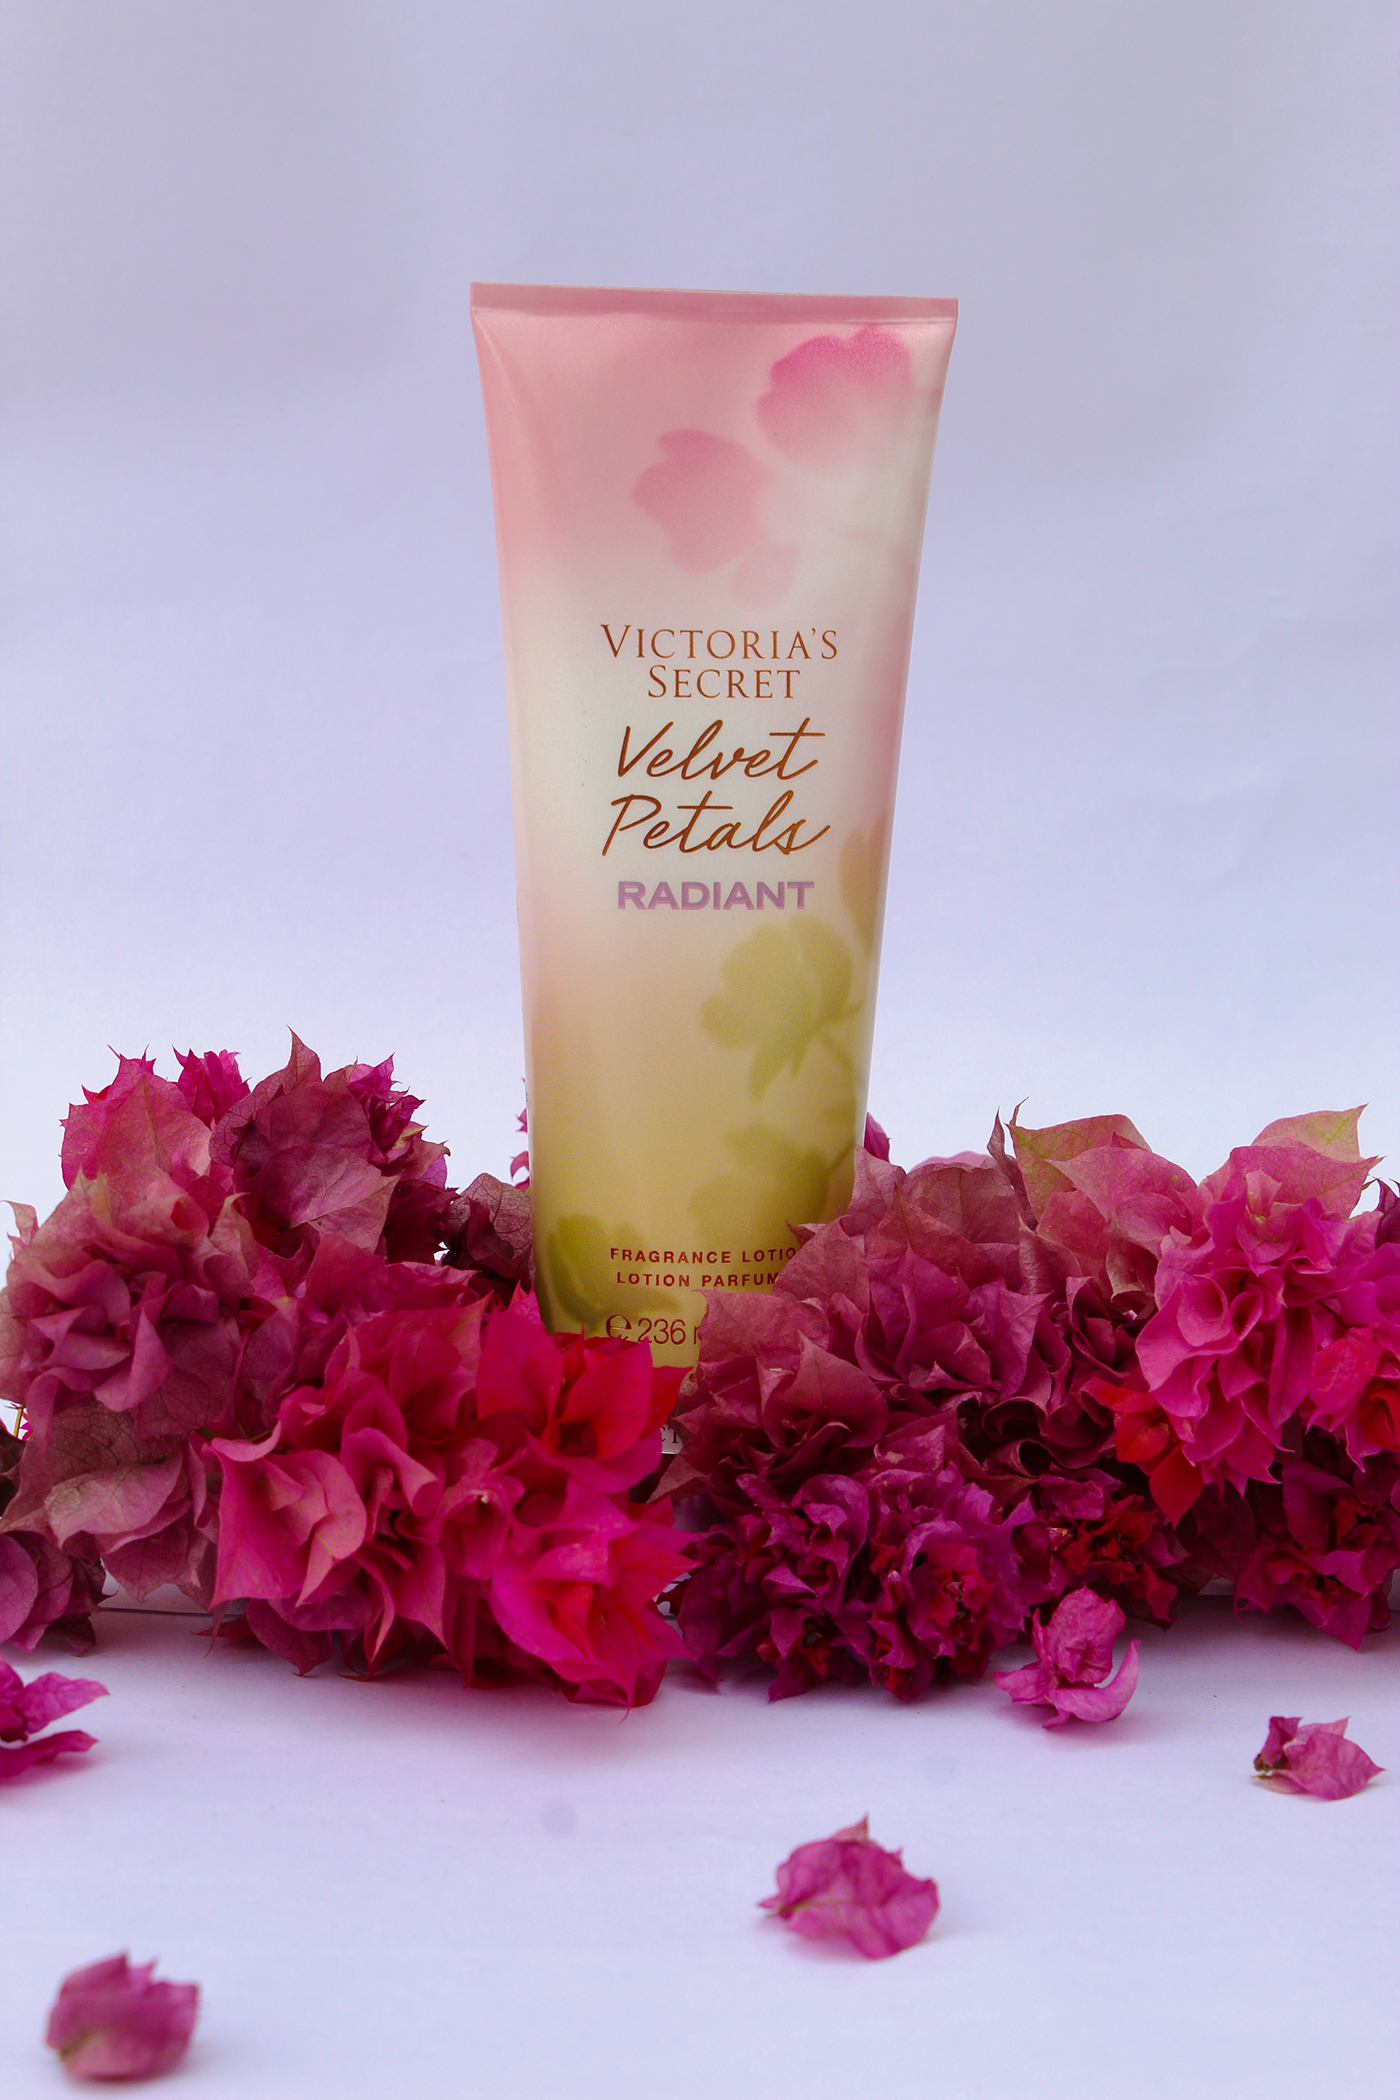 advertisement advertismentphotography bodylotion packaging branding ideas lotion packaging phtotography pinkflowers productshot Victoria's Secret victoriassecretpink